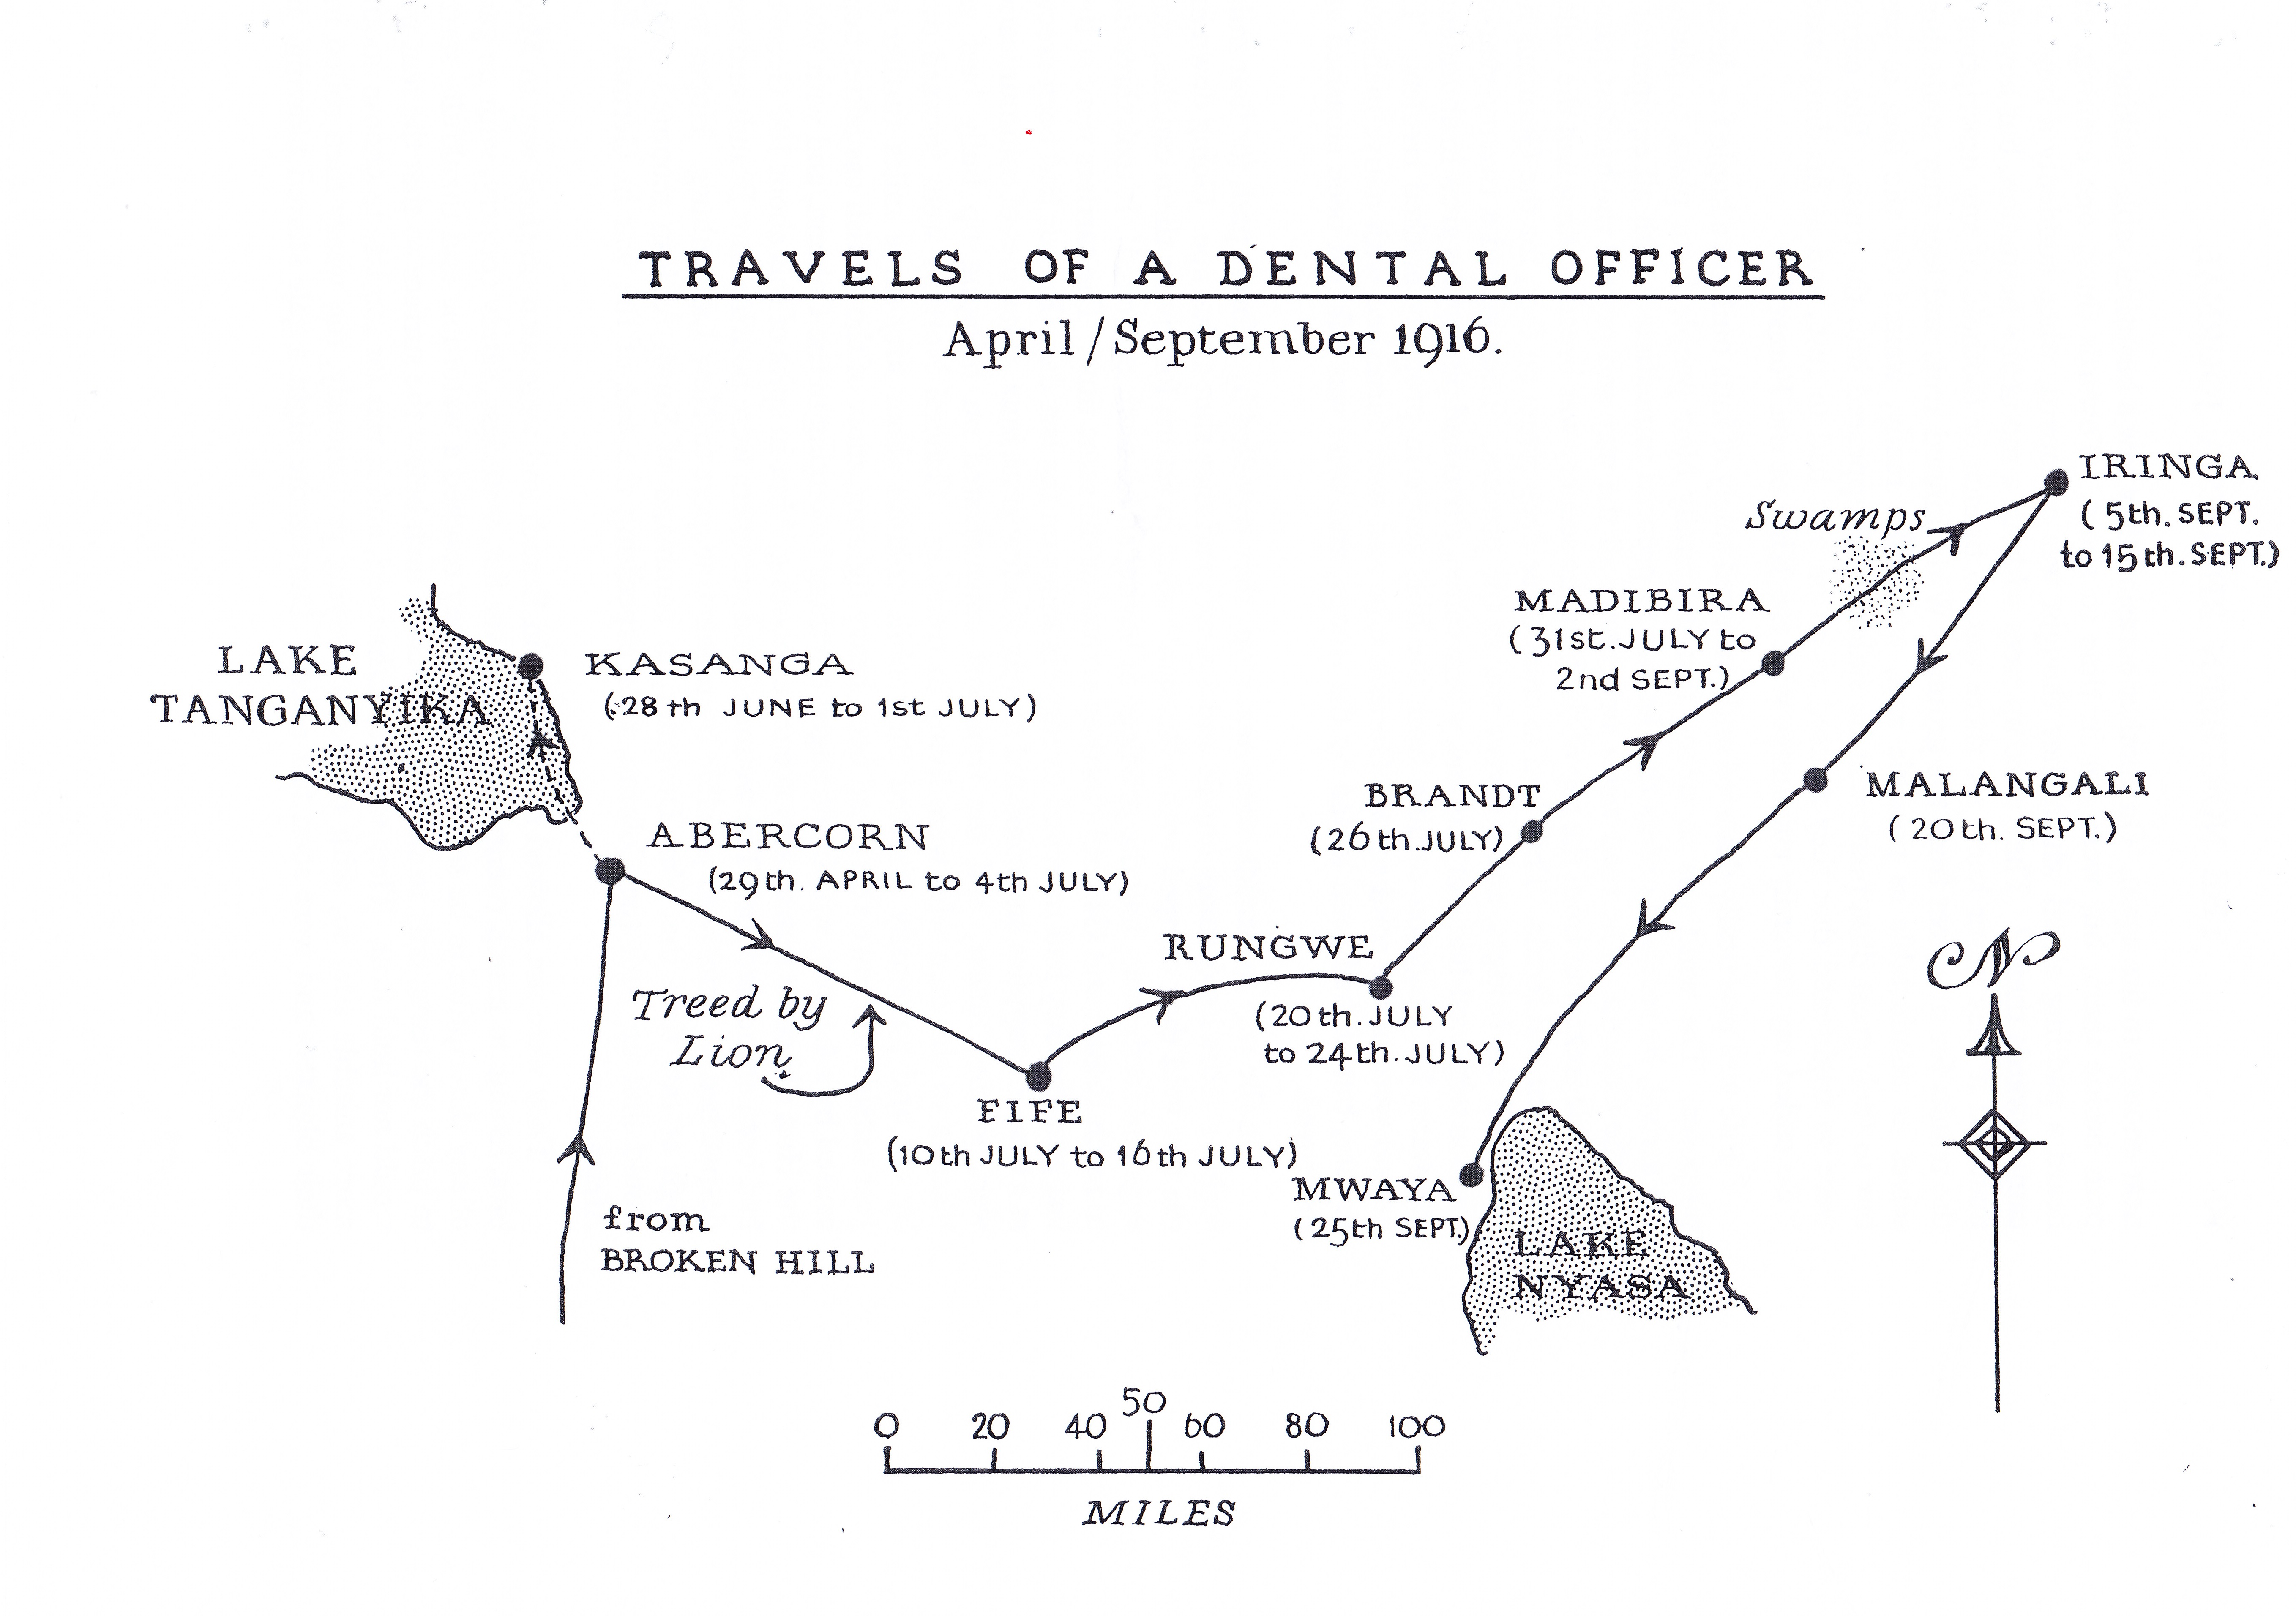 A map drawn by William of his expedition to the border of German East Africa in mid 1916